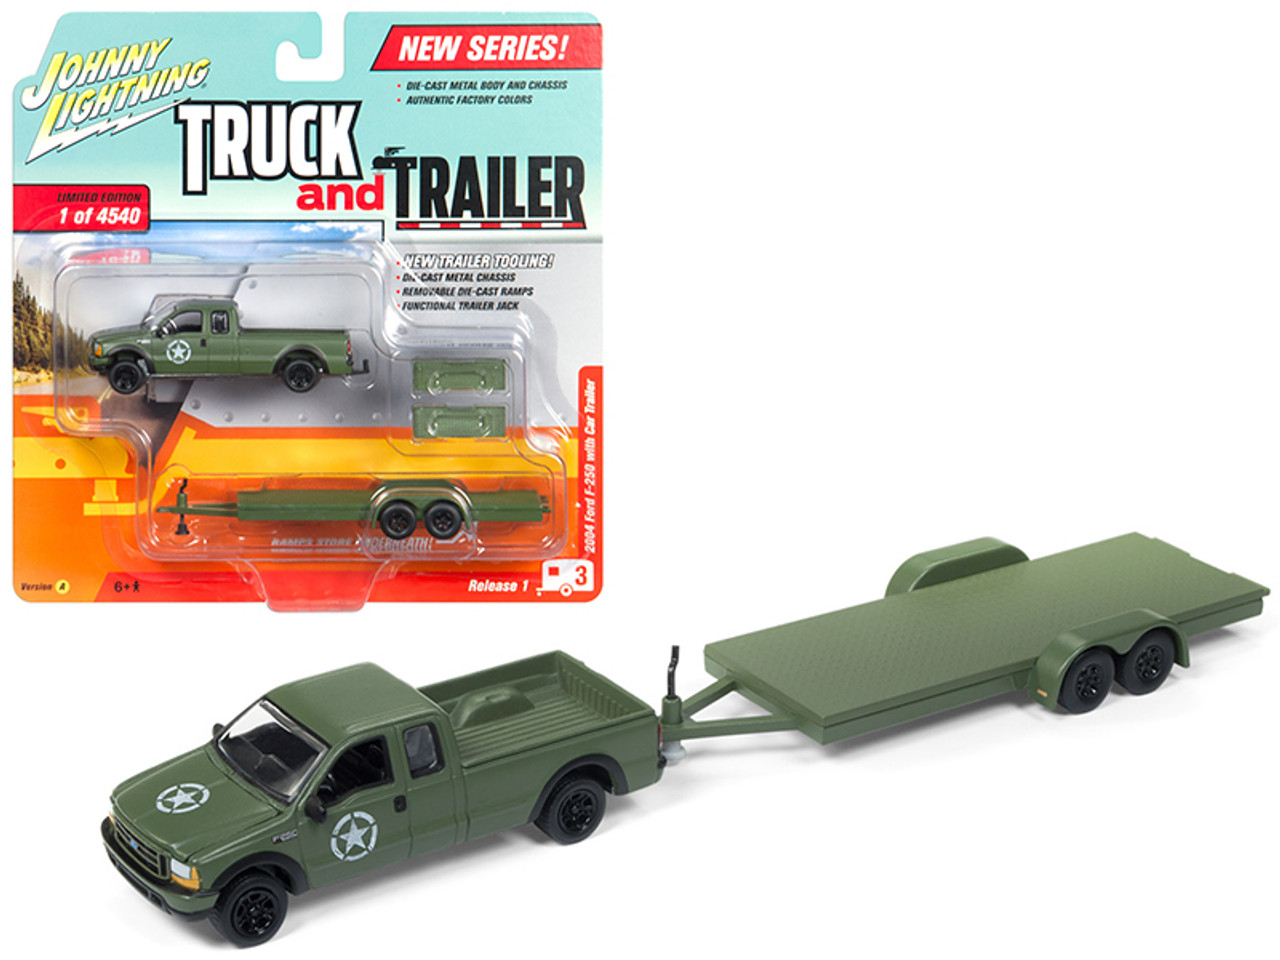 2004 Ford F-250 Army Green with Car Trailer Limited Edition to 4540 pieces Worldwide "Truck and Trailer" Series 1 1/64 Diecast Model Car by Johnny Lightning